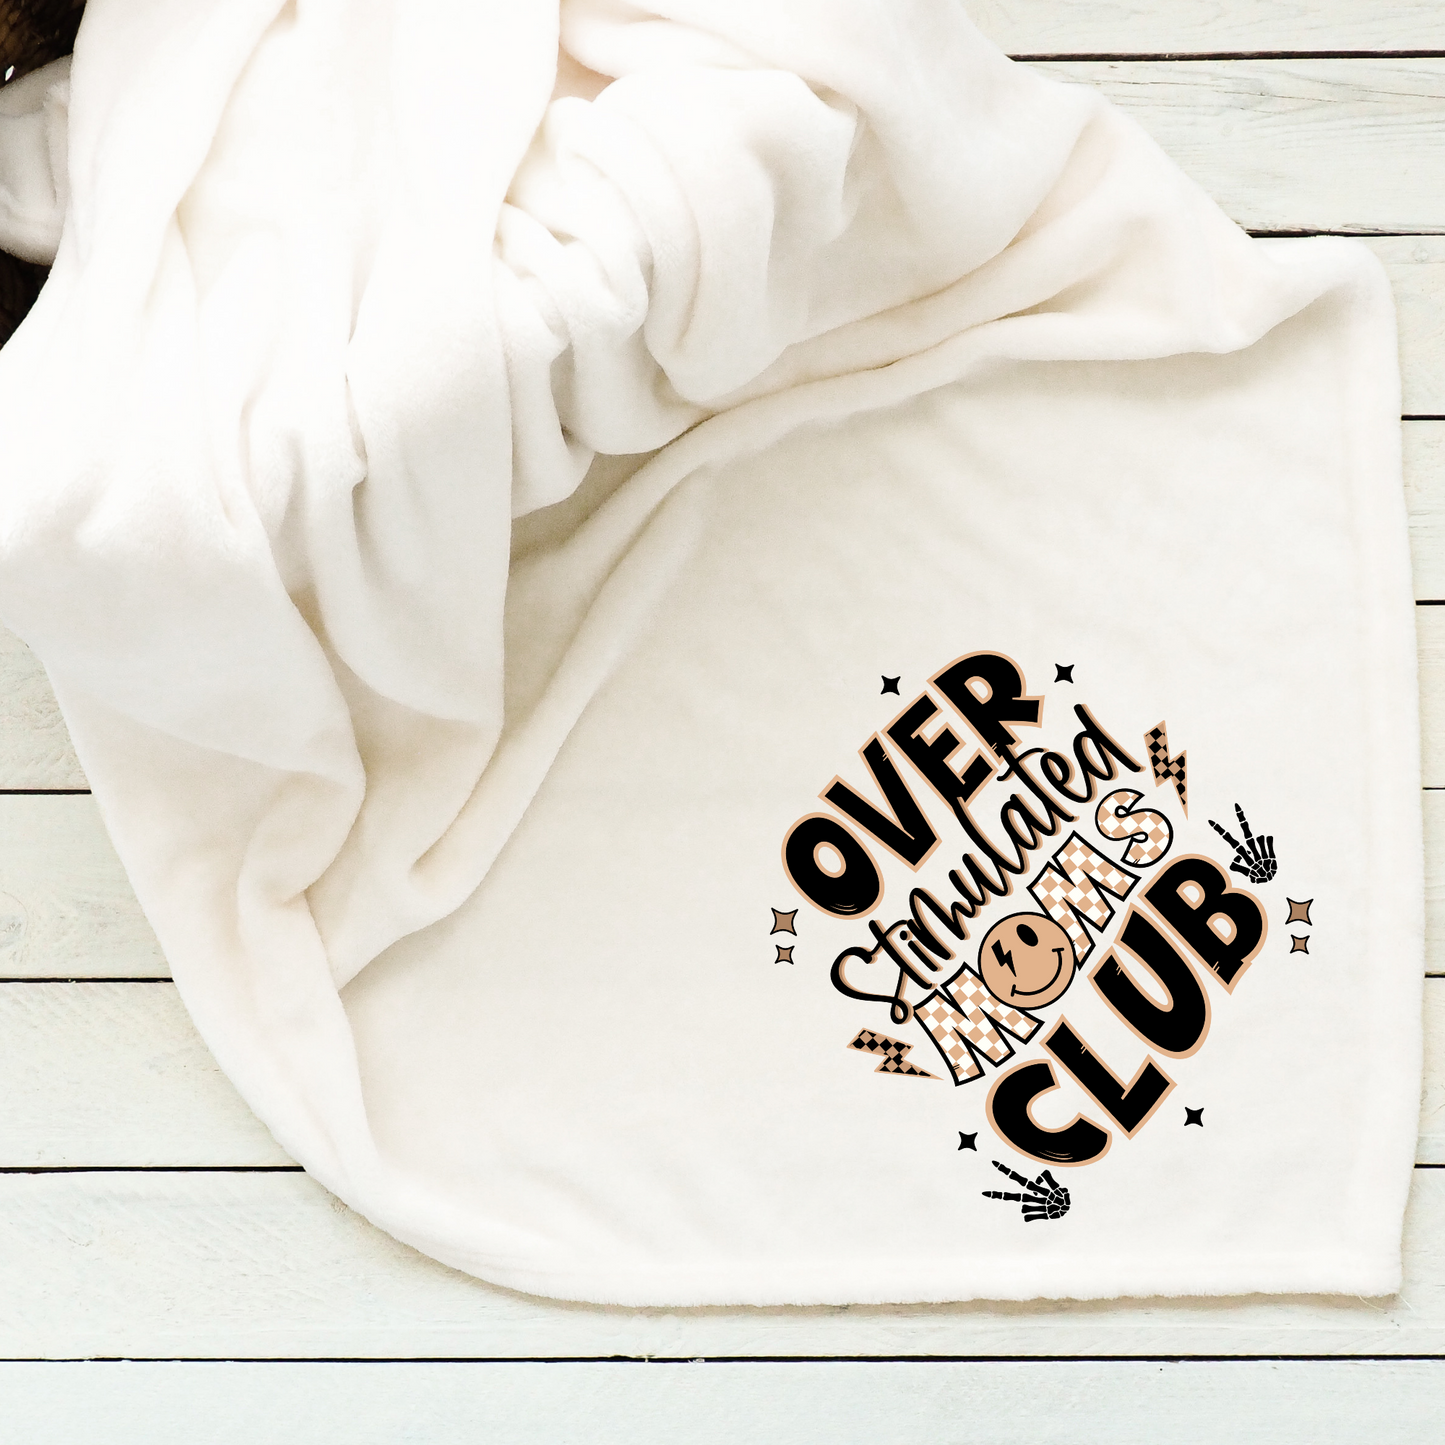 Neutral Overstimulated Moms Club Plush throw blanket